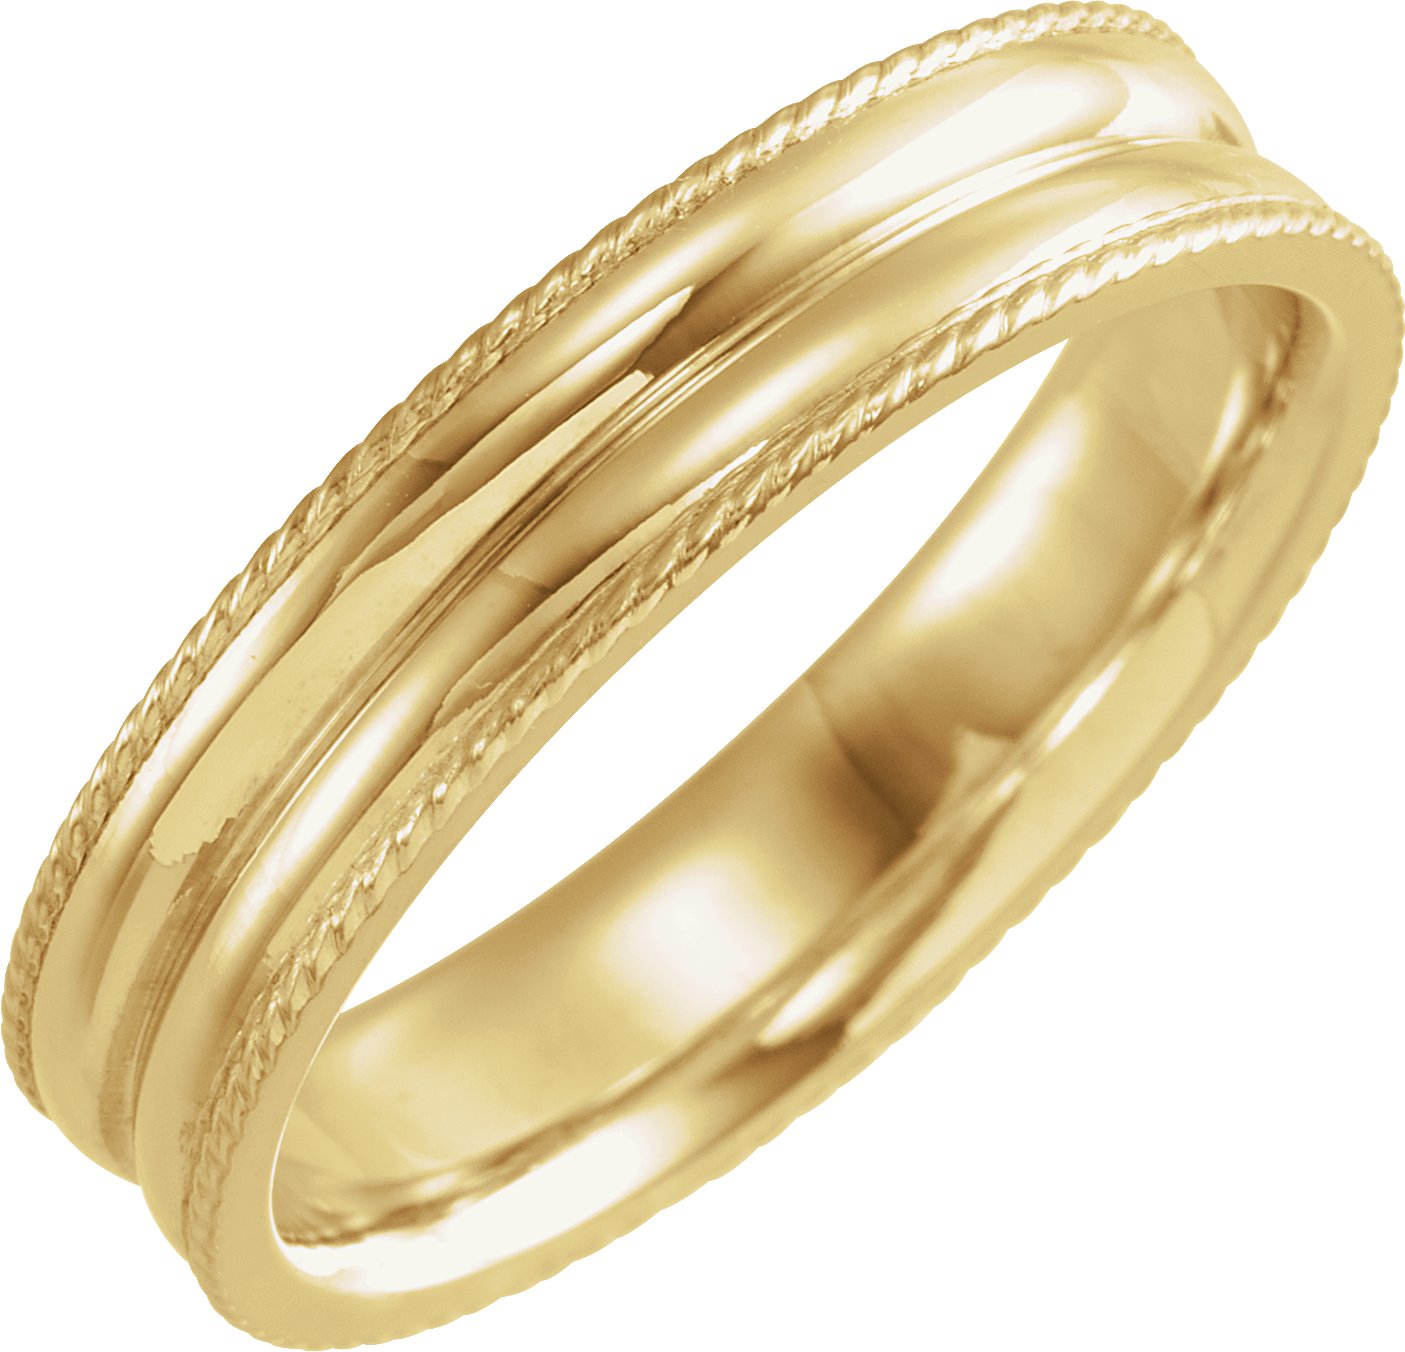 14K Yellow 5 mm Grooved Band with Rope Edge Size 9